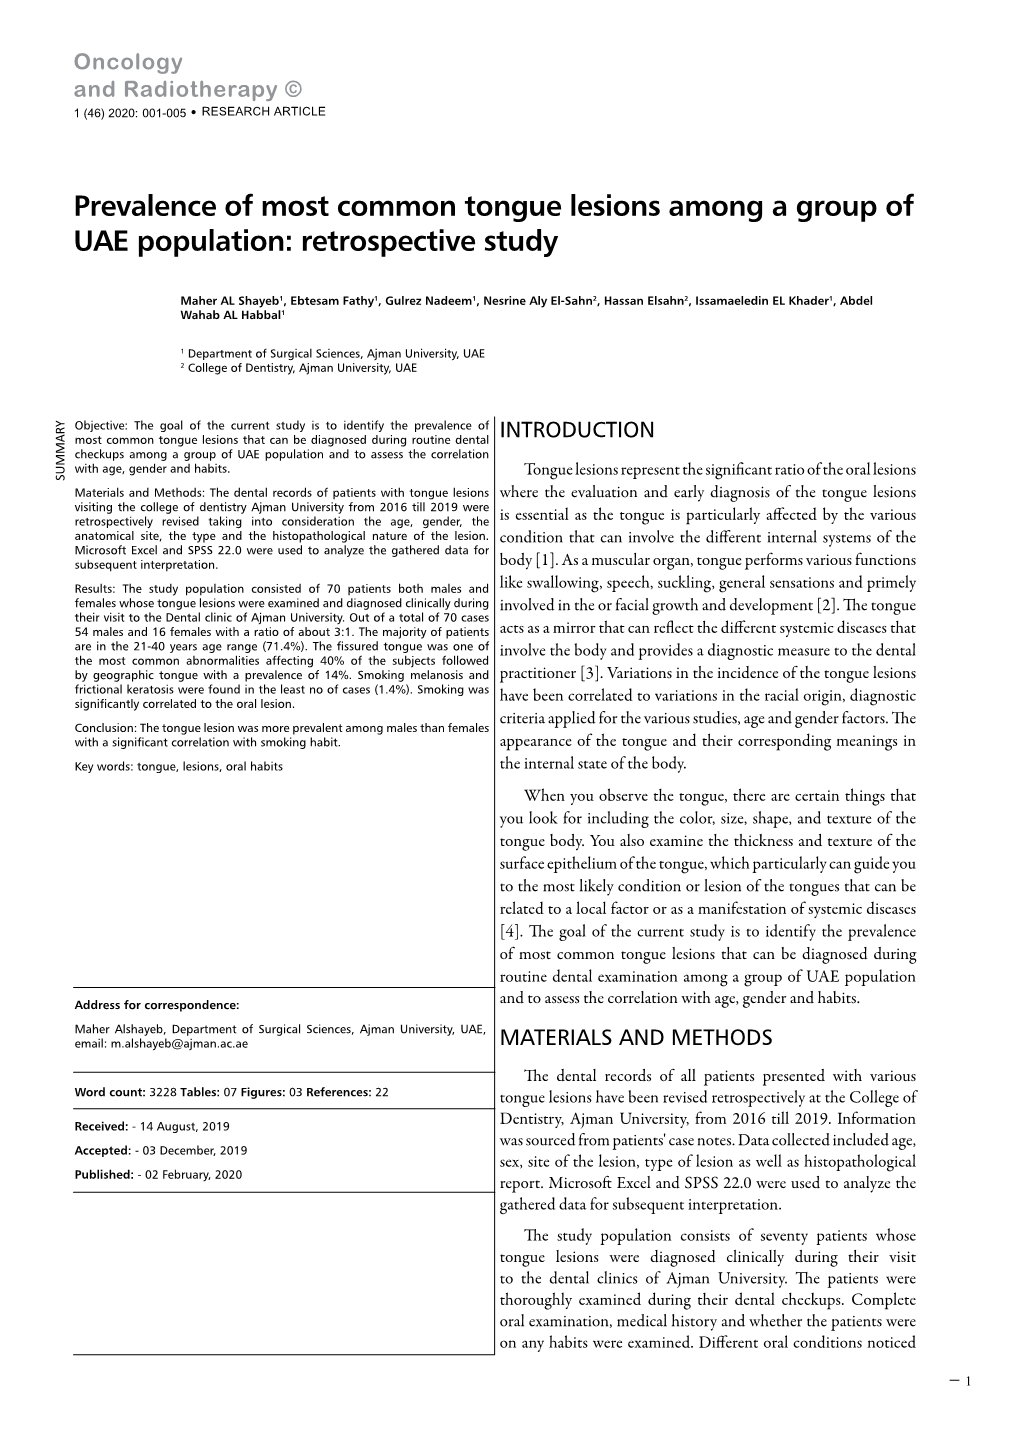 Prevalence of Most Common Tongue Lesions Among a Group of UAE Population: Retrospective Study